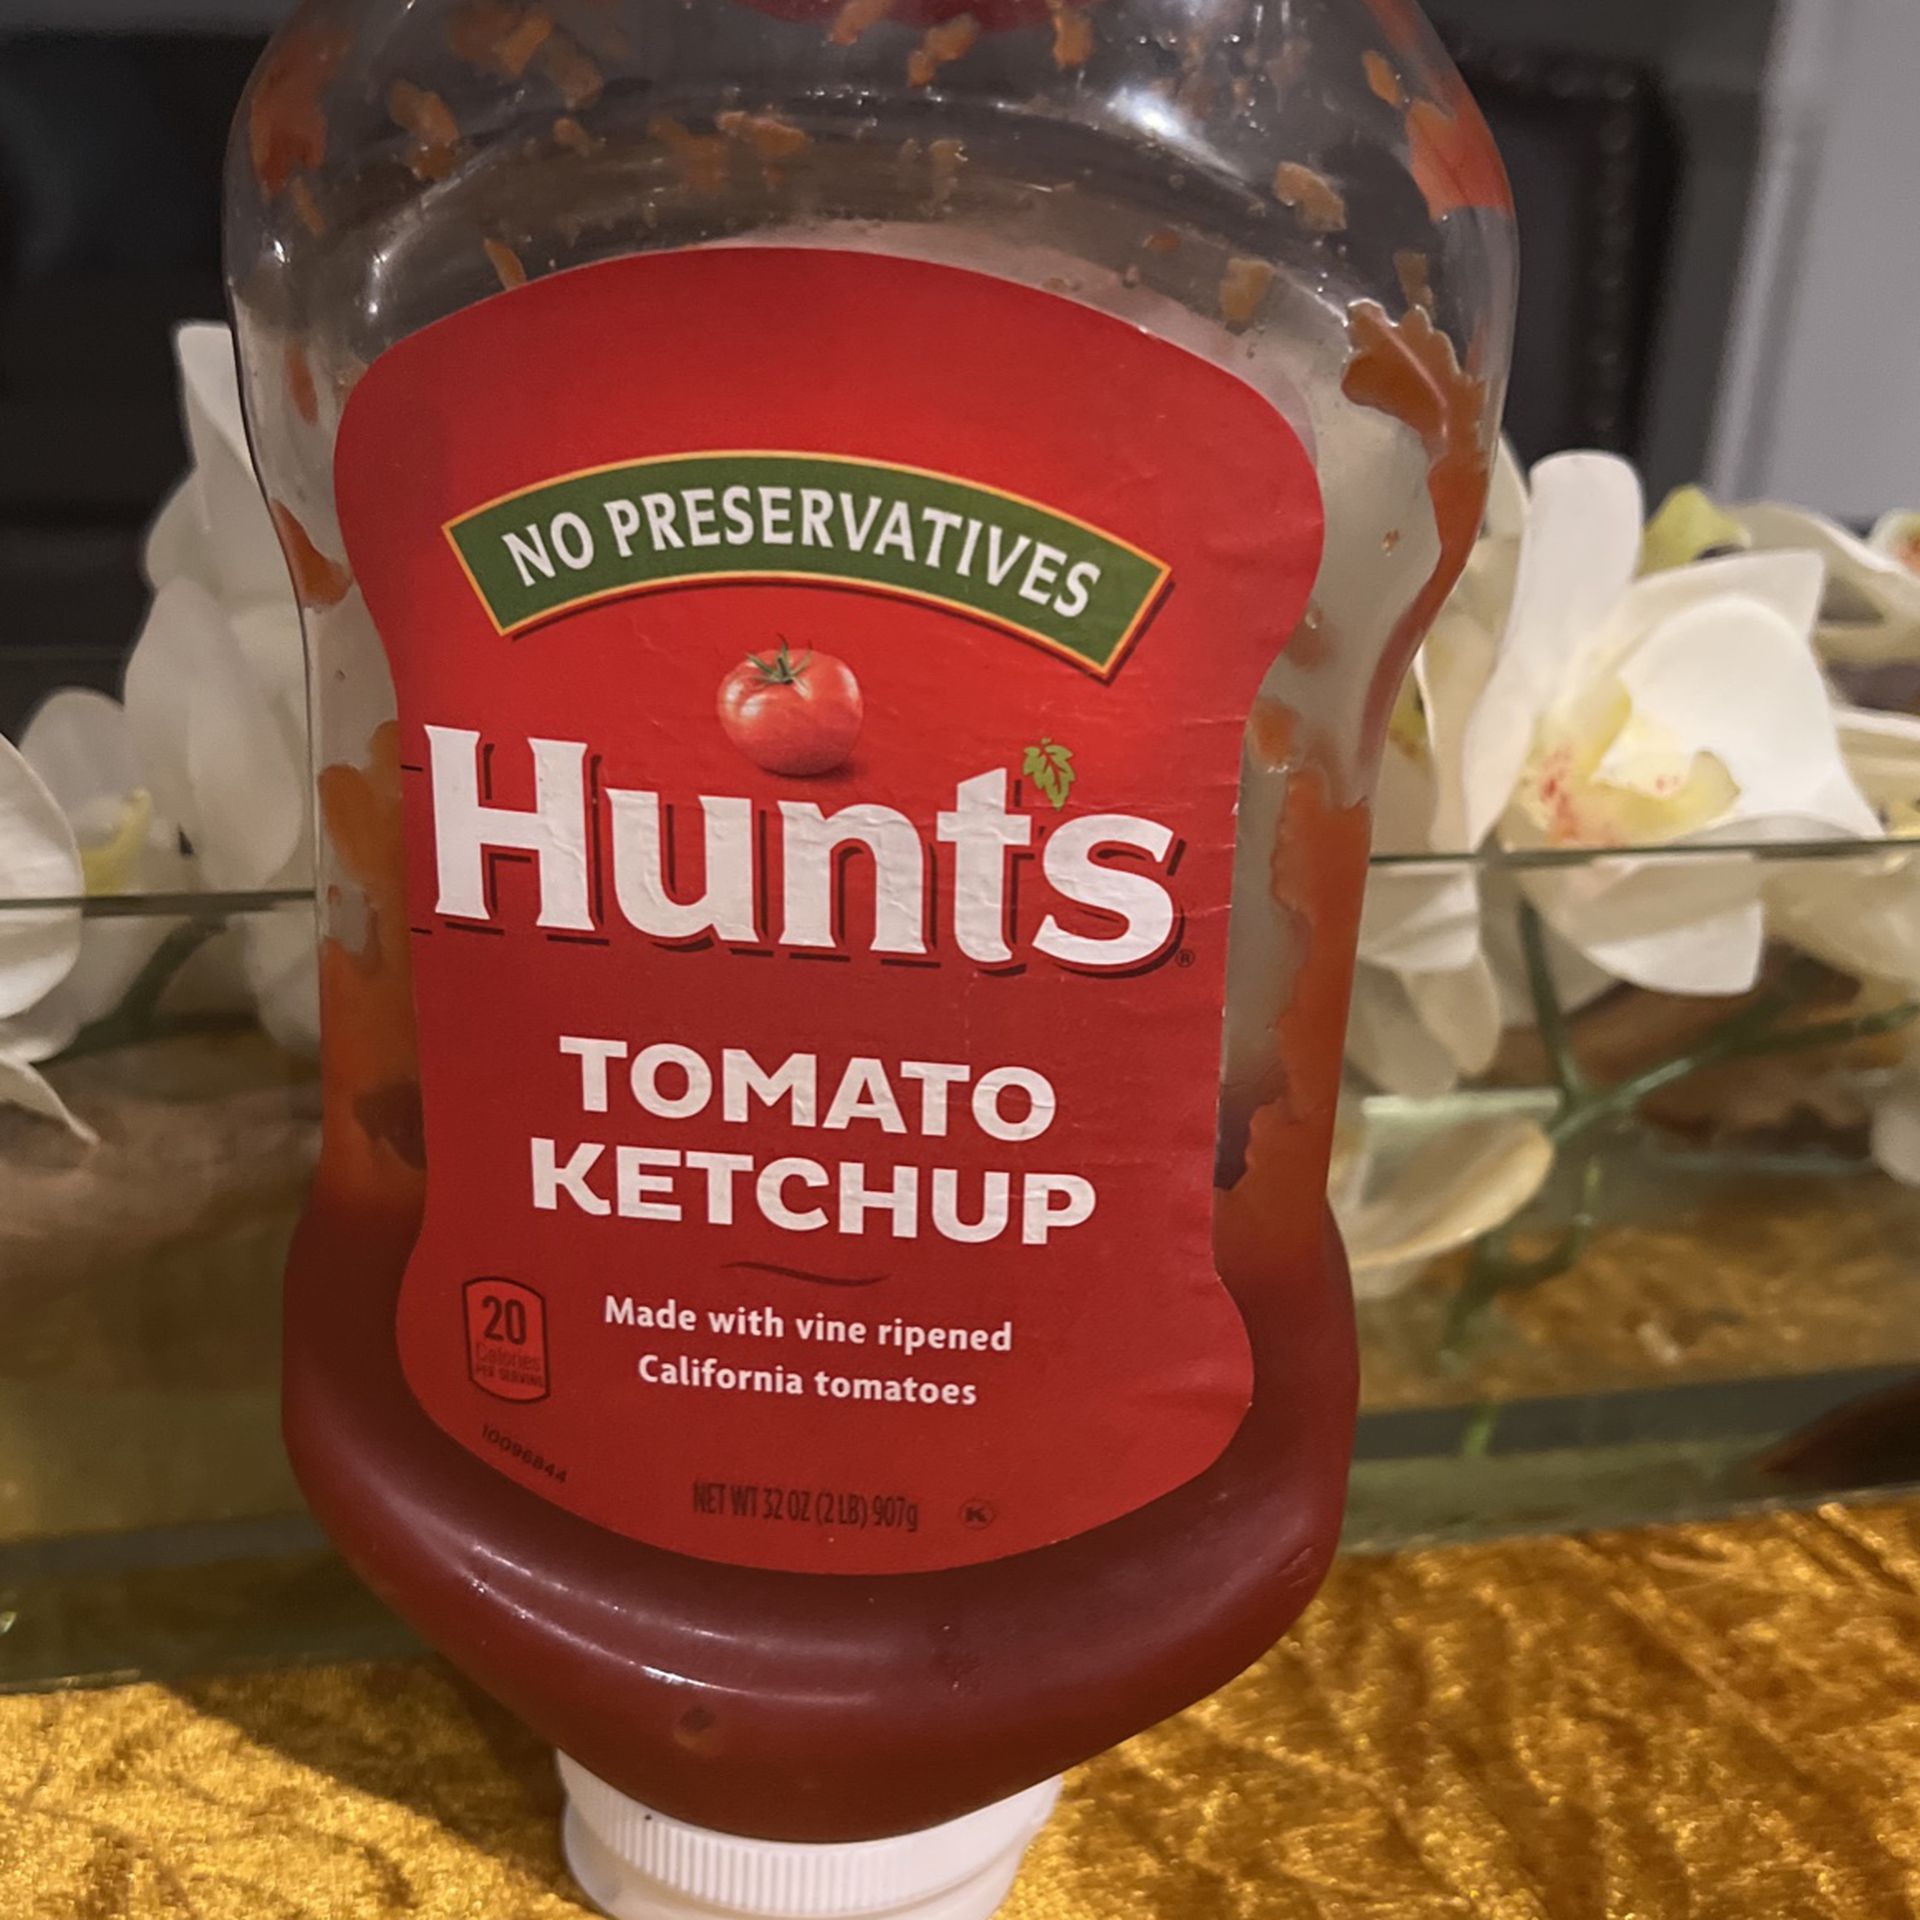 Used Ketchup Bottle